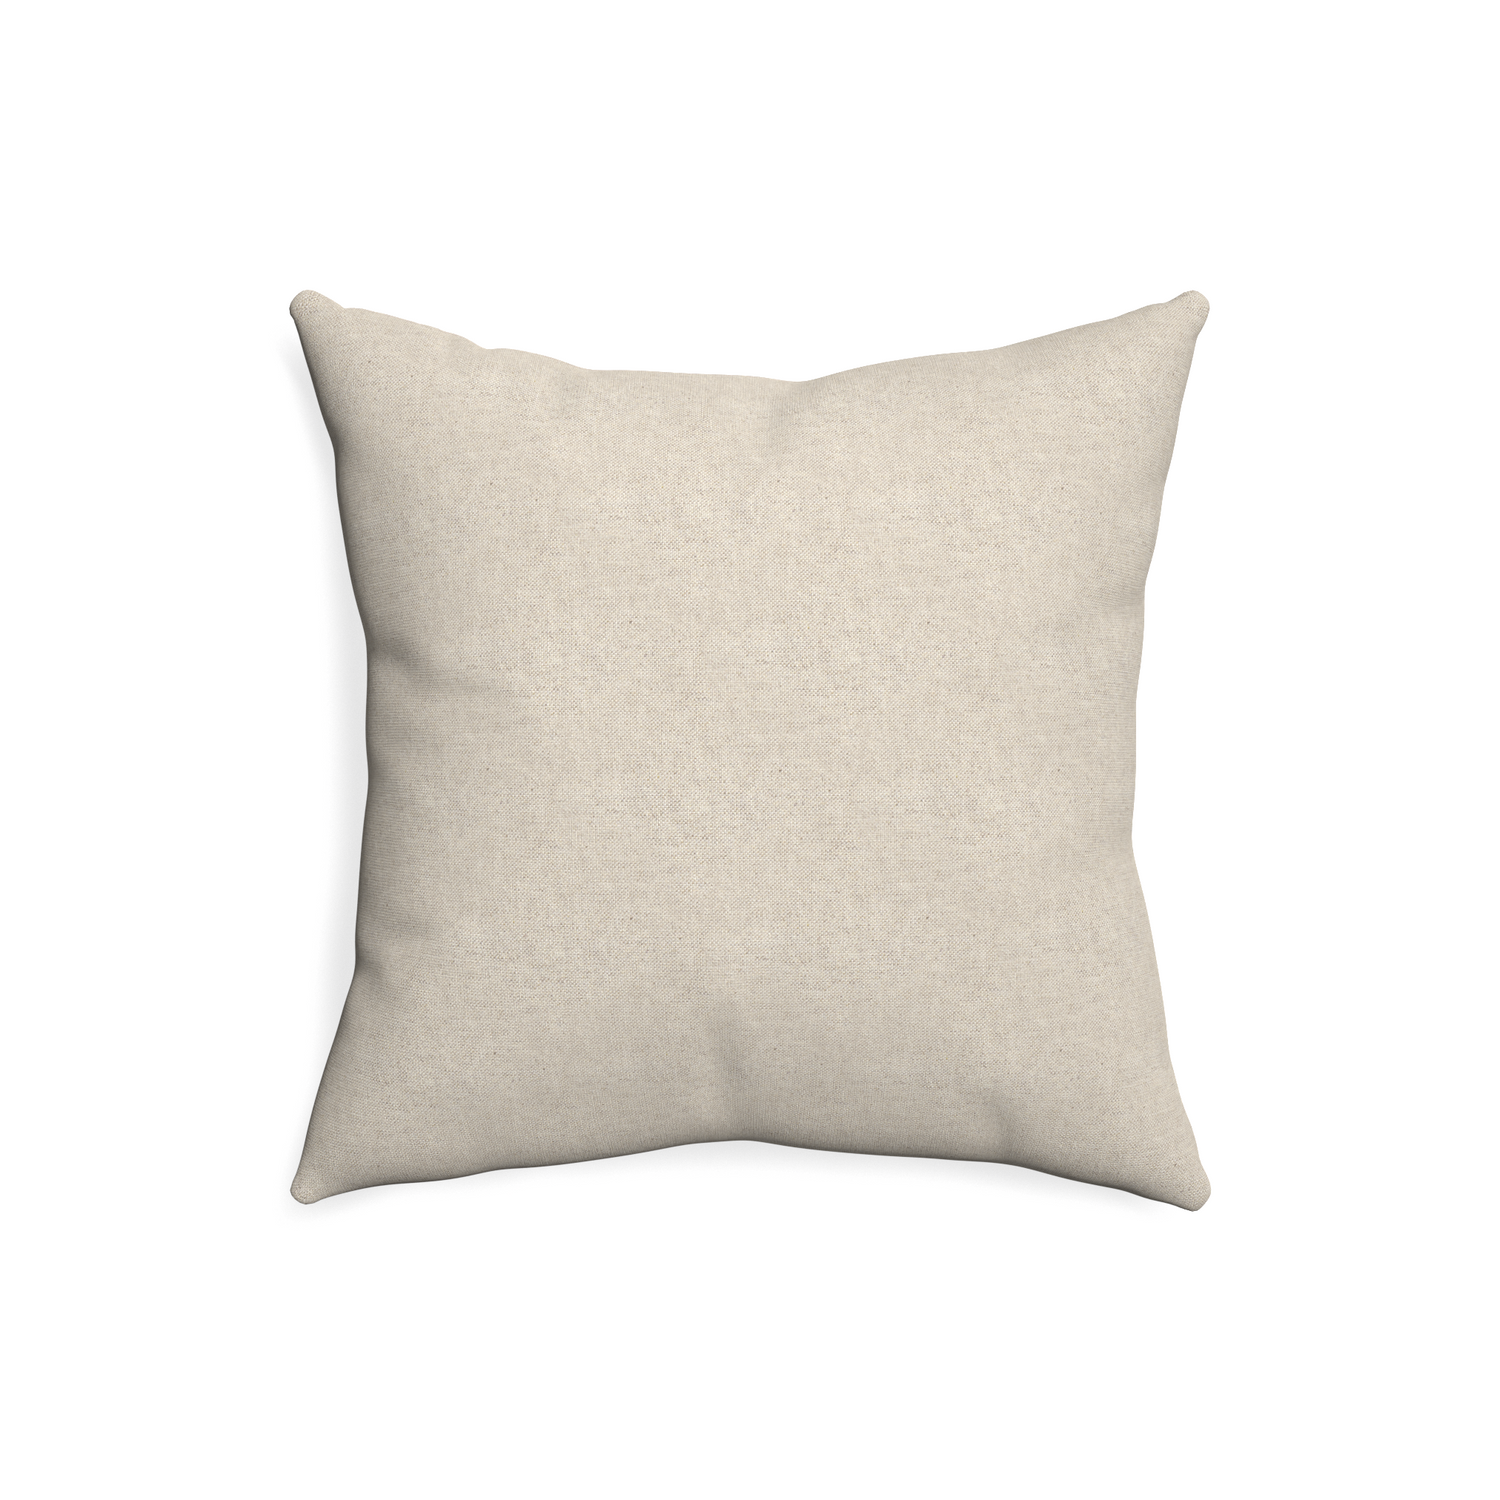 20-square oat custom light brownpillow with none on white background